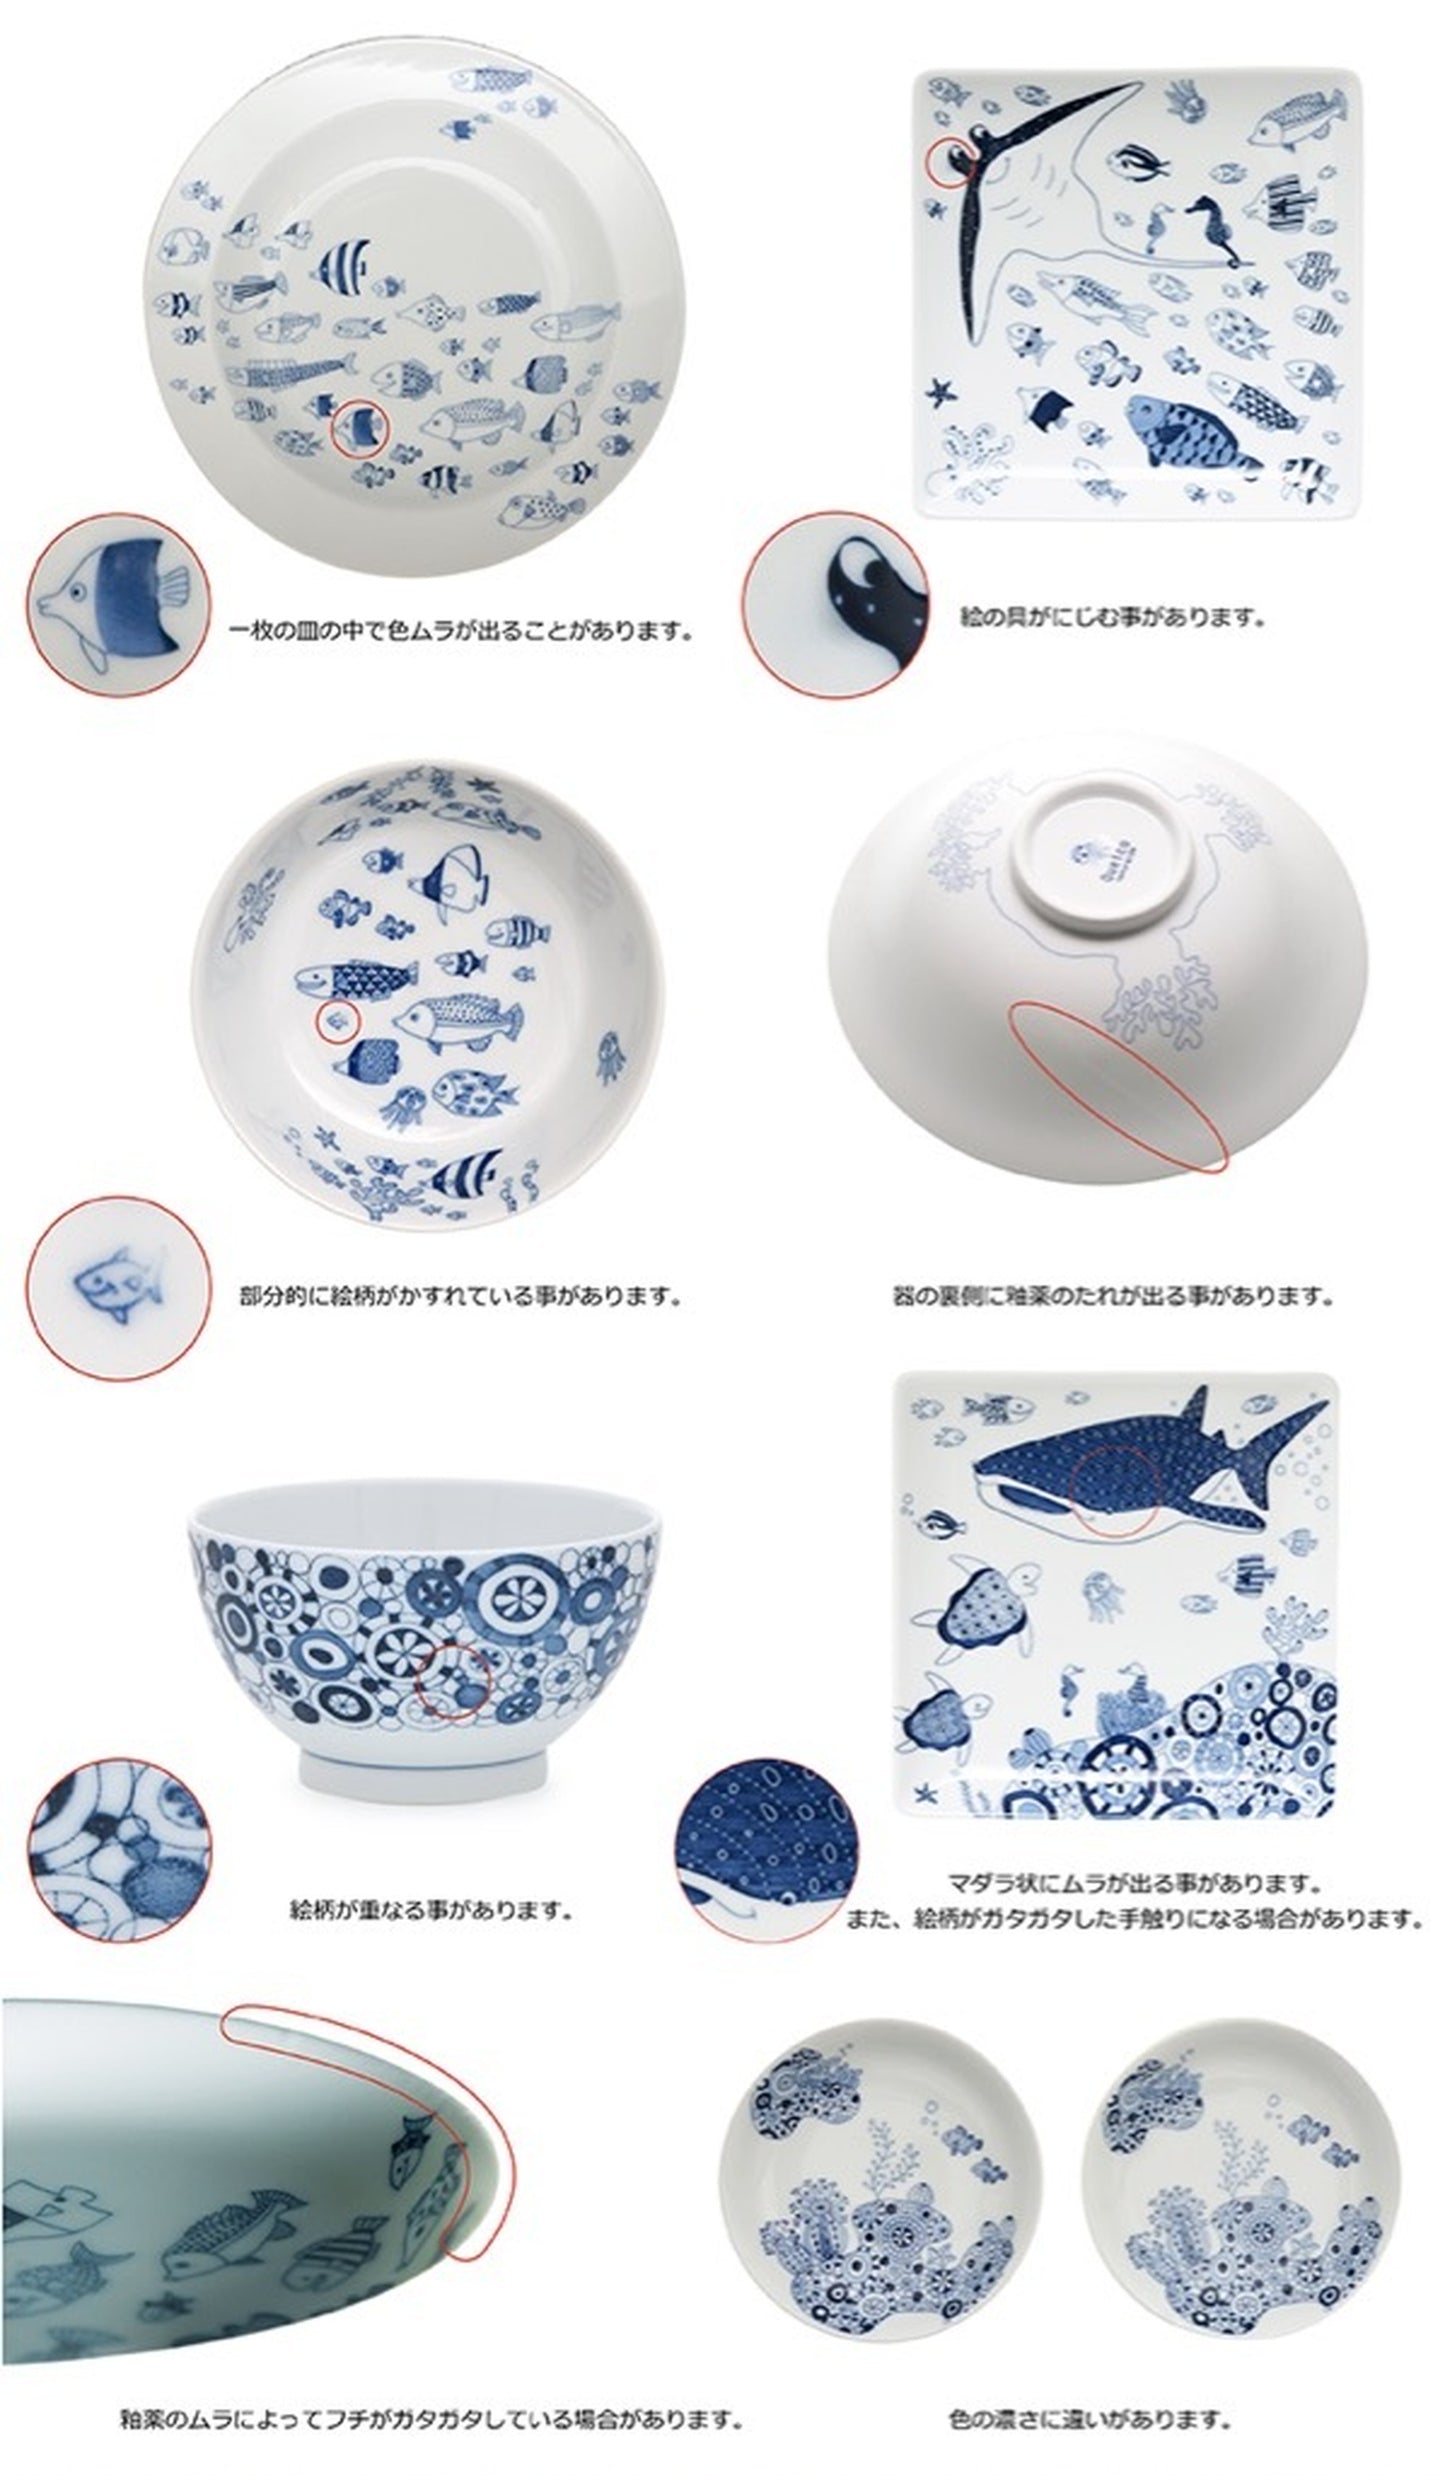 [natural69] [cocomarine] [Serving plate] [Approx.23.5cm] Hasami Ware Tableware Nordic Square Plate Square Whale Shark Fish Pattern Manta Ray Pasta Curry